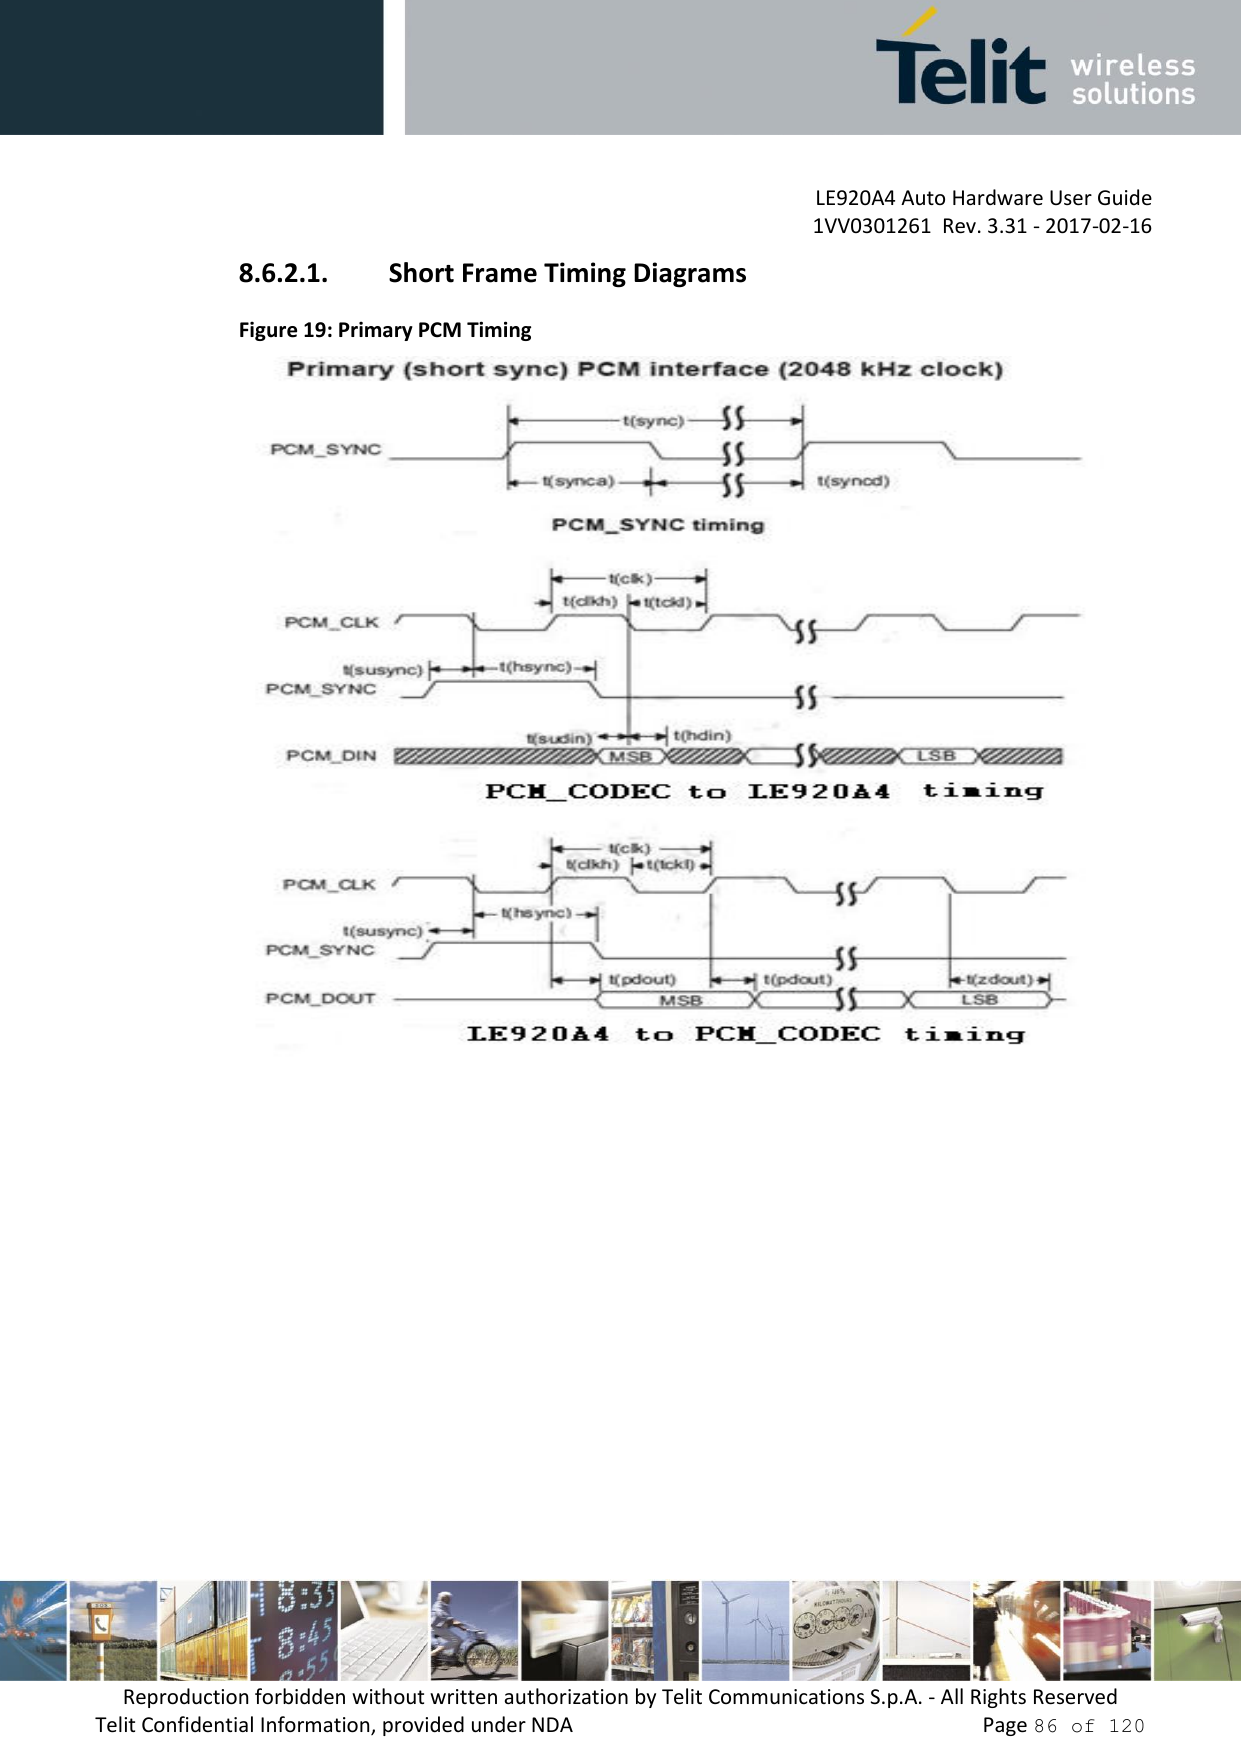         LE920A4 Auto Hardware User Guide     1VV0301261  Rev. 3.31 - 2017-02-16 Reproduction forbidden without written authorization by Telit Communications S.p.A. - All Rights Reserved Telit Confidential Information, provided under NDA                 Page 86 of 120 8.6.2.1. Short Frame Timing Diagrams Figure 19: Primary PCM Timing     